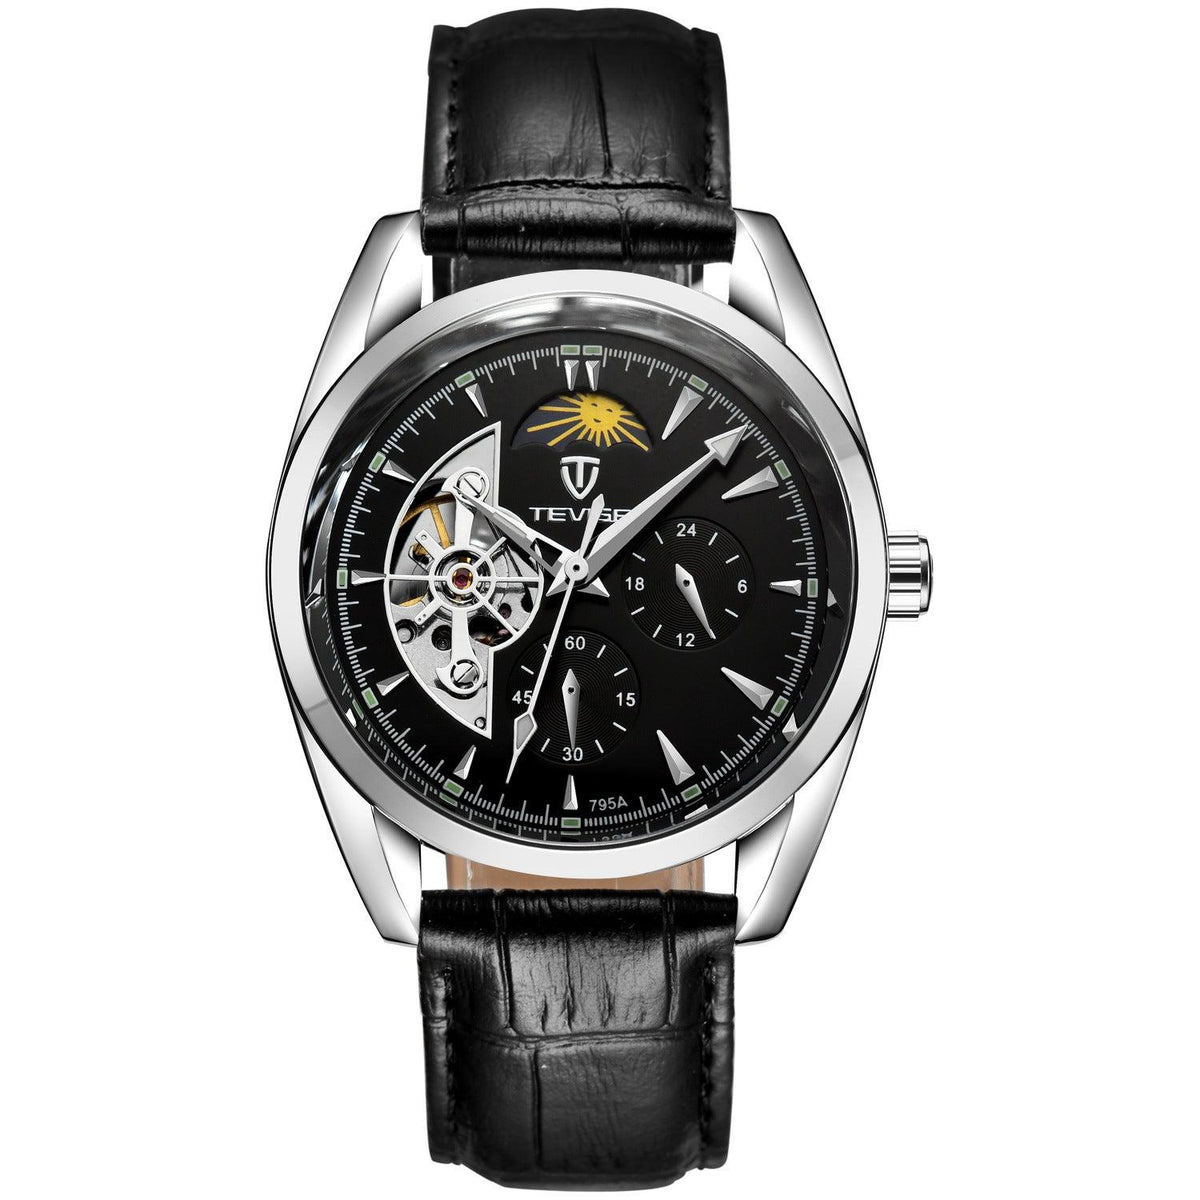 TEVISE Moon Phase Chronograph Automatic Mechanical Wrist Watch For Men 795A